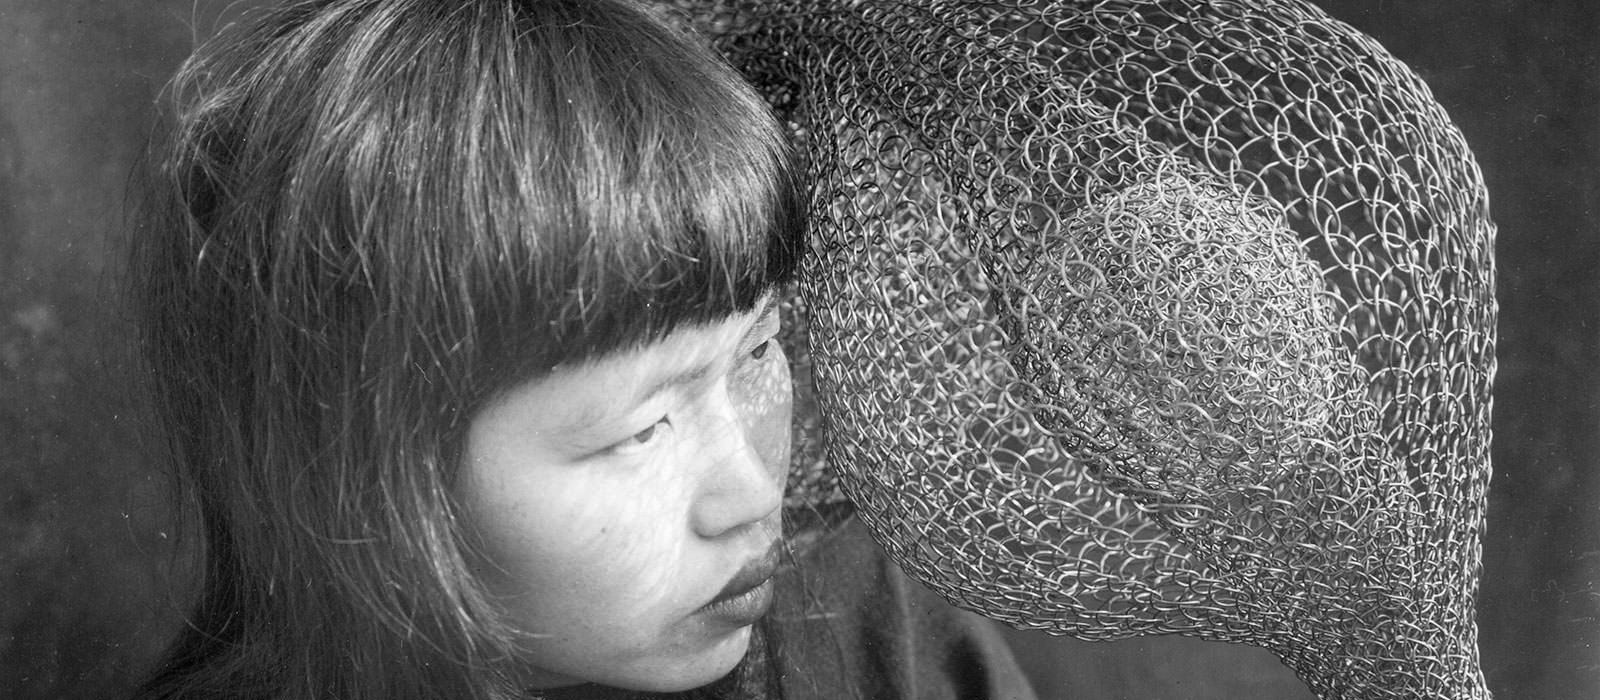 Ruth Asawa's face next to one of her sculptures